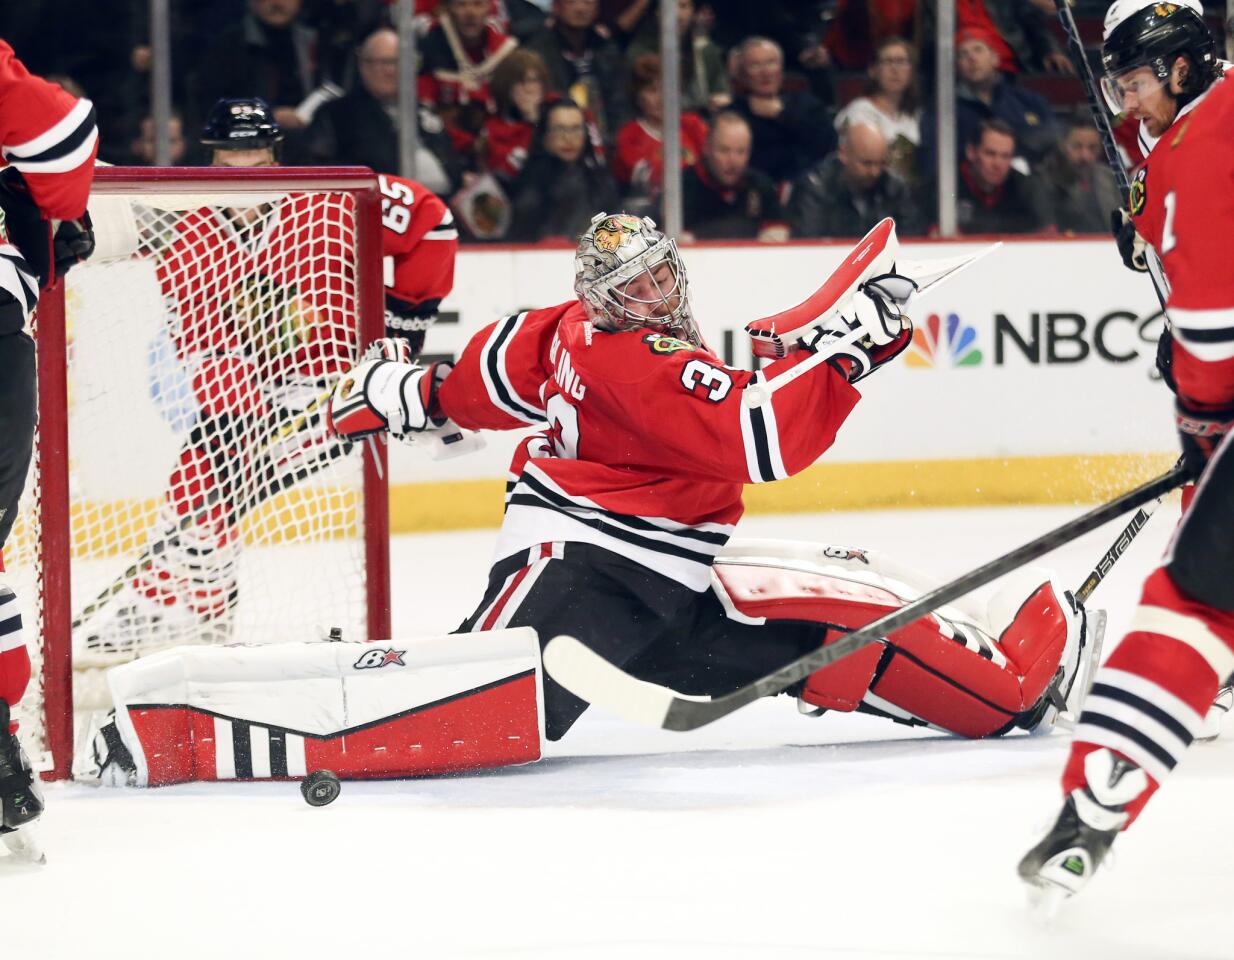 Scott Darling stops a puck during the second period.